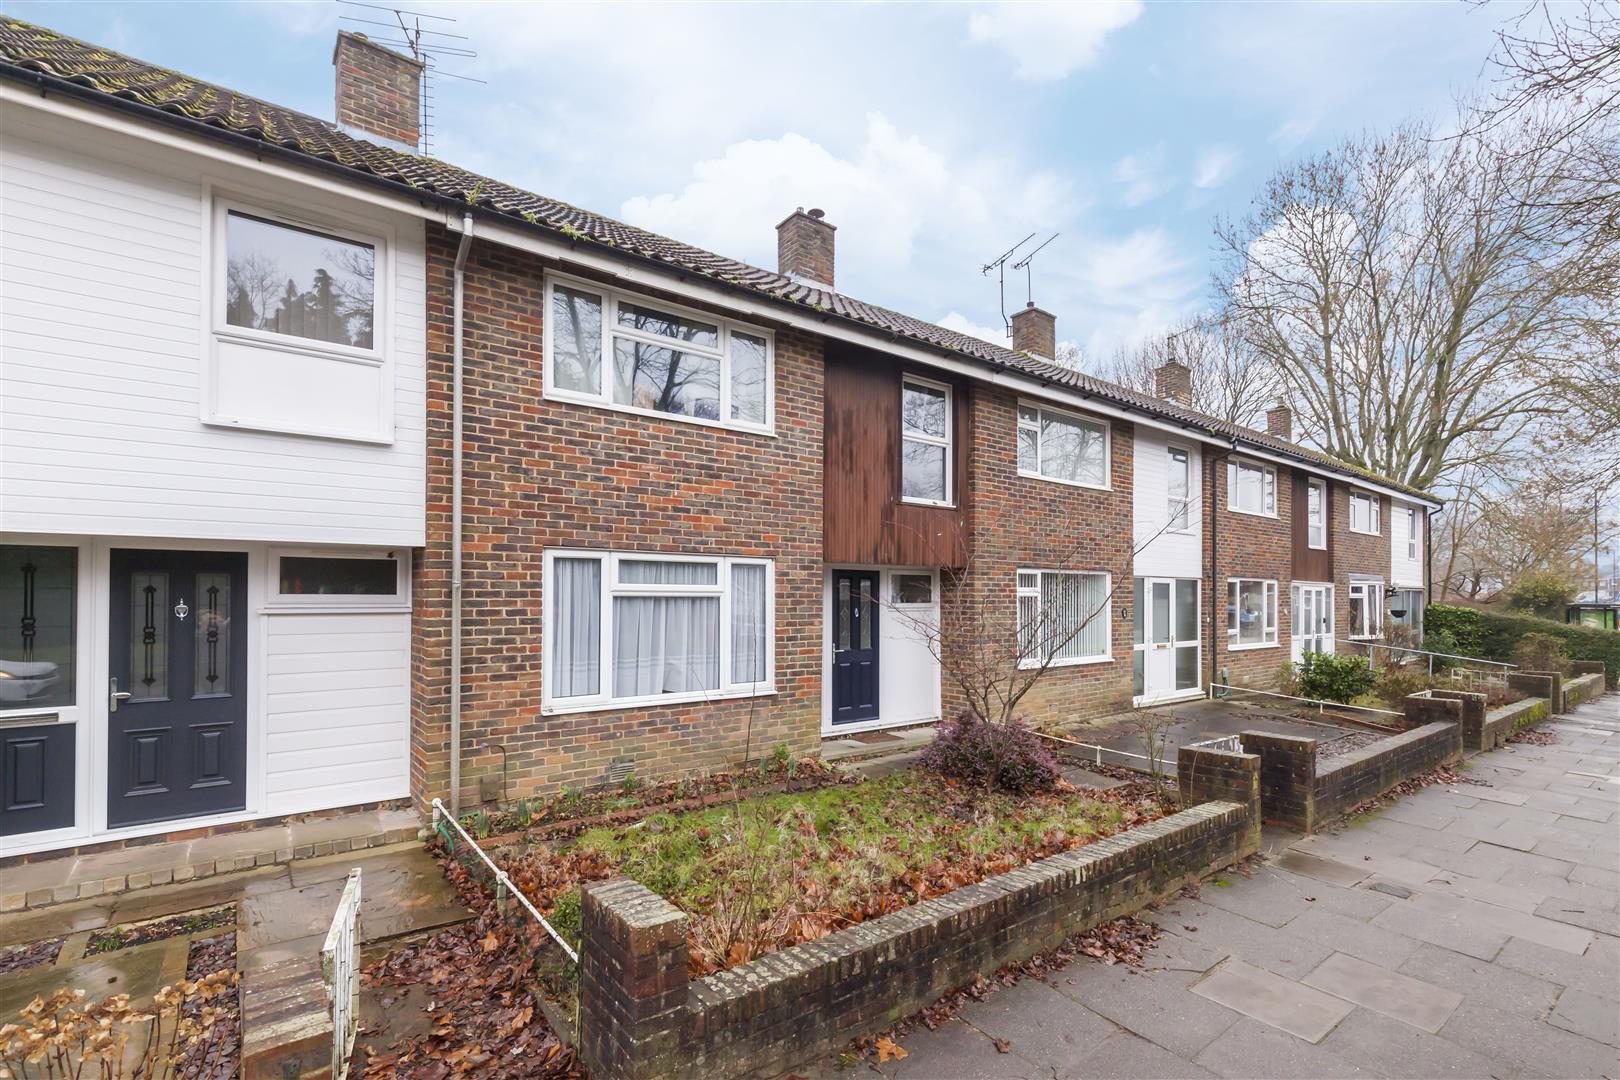 3 bed terraced house for sale in Furnace Drive, Crawley - Property Image 1